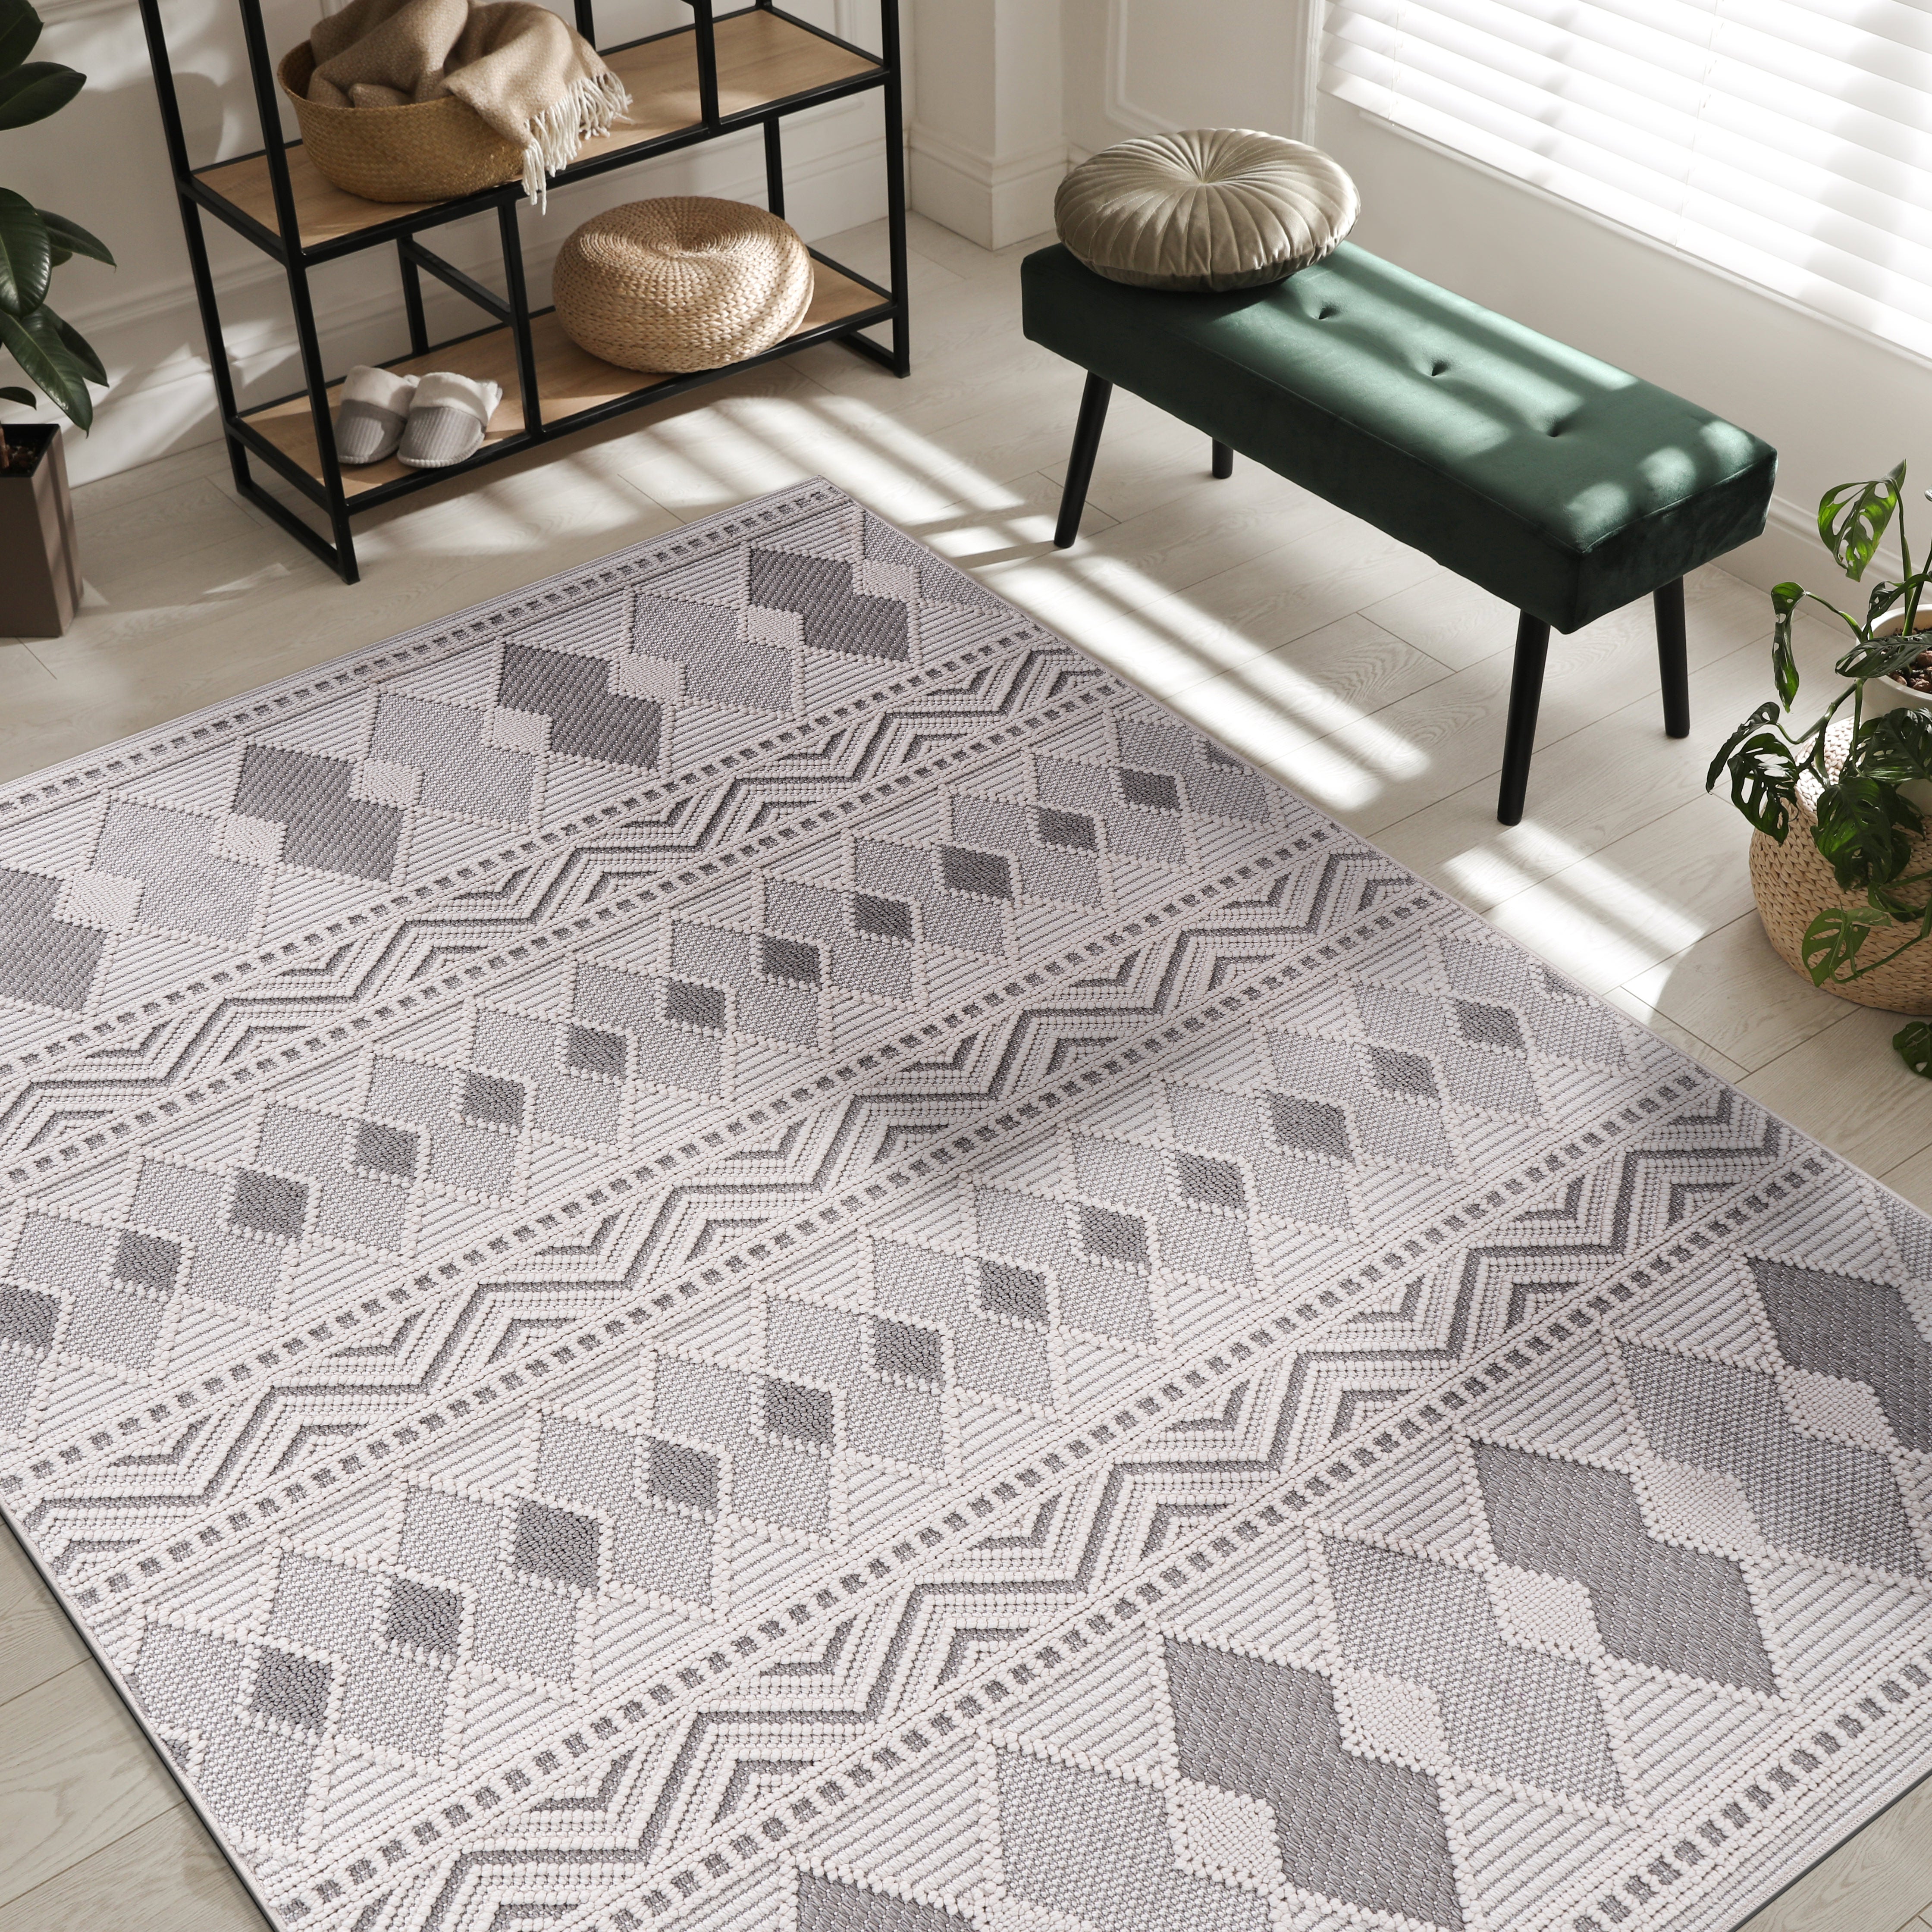 Micro Loop Area Rugs  GY6 - White / Gray